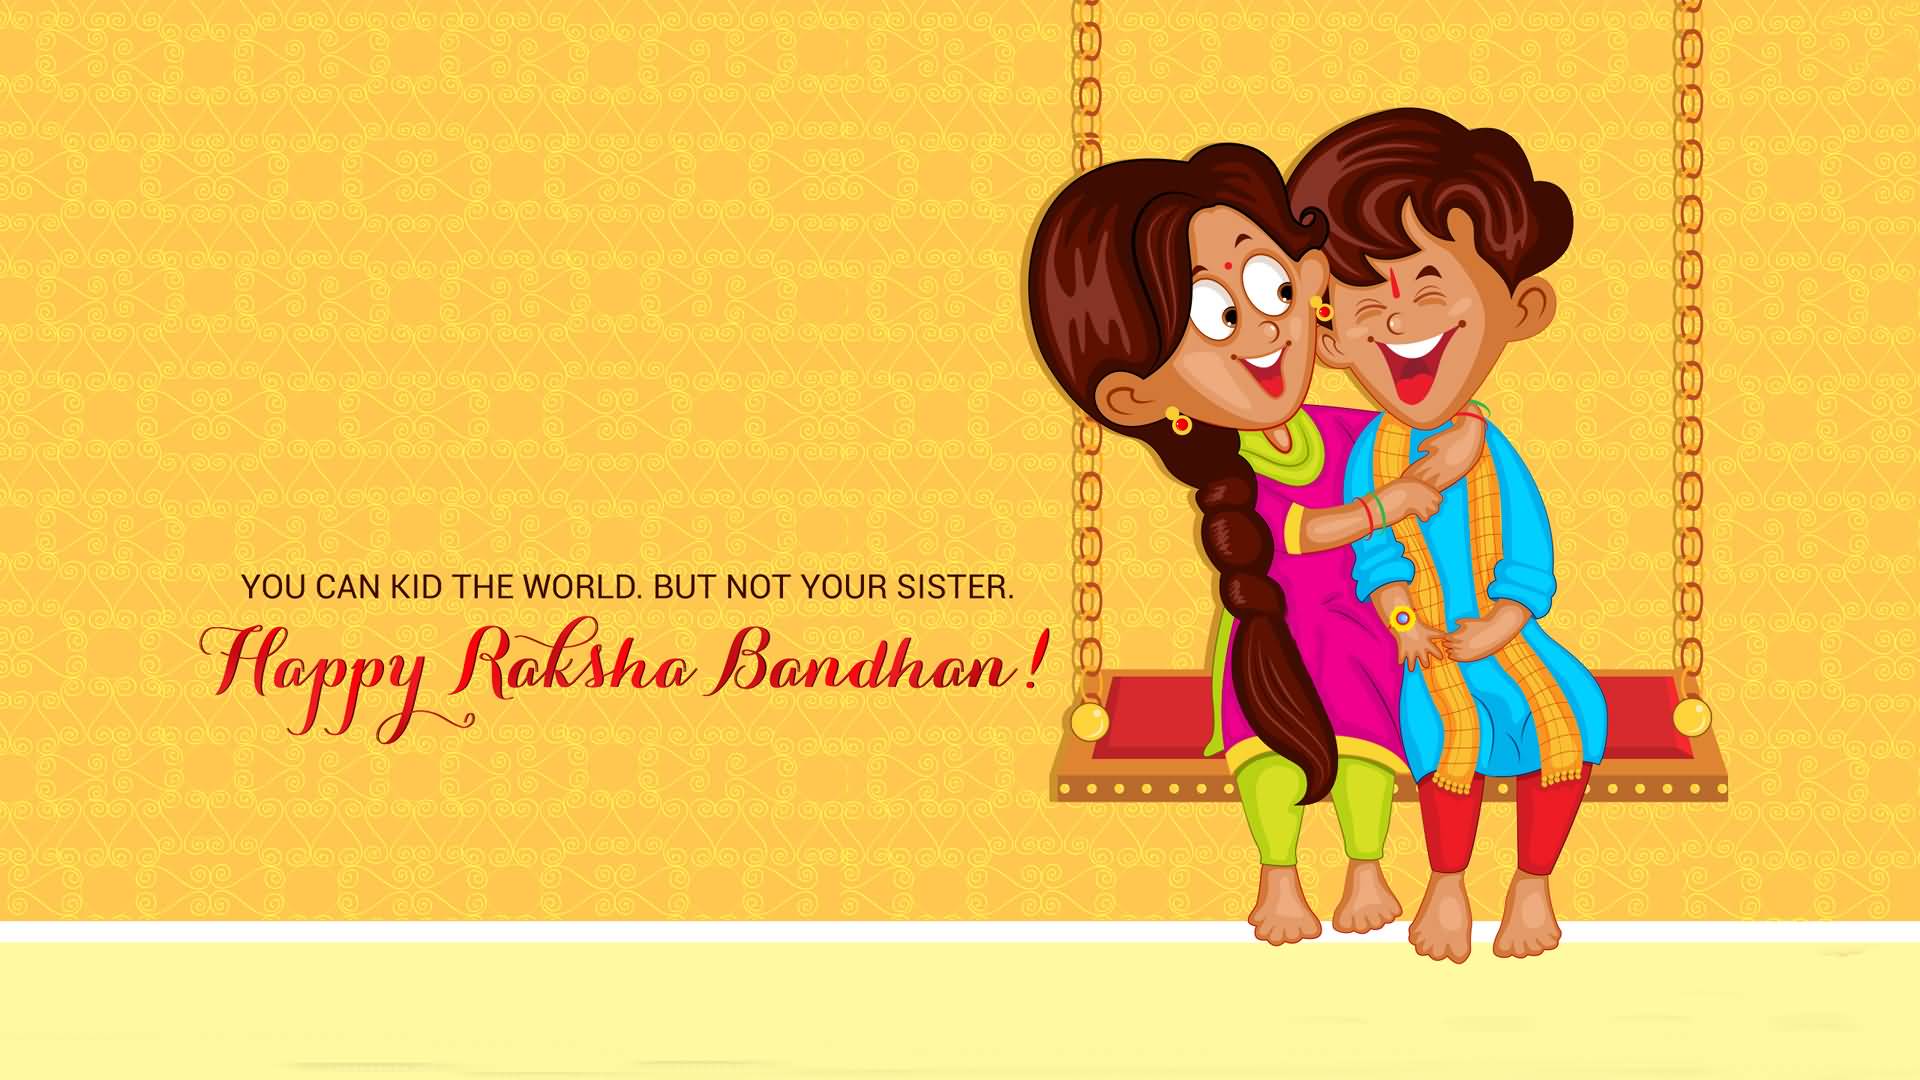 You Can Kid The World But Not Your Sister Happy Raksha Bandhan Brother And Sister Illustration